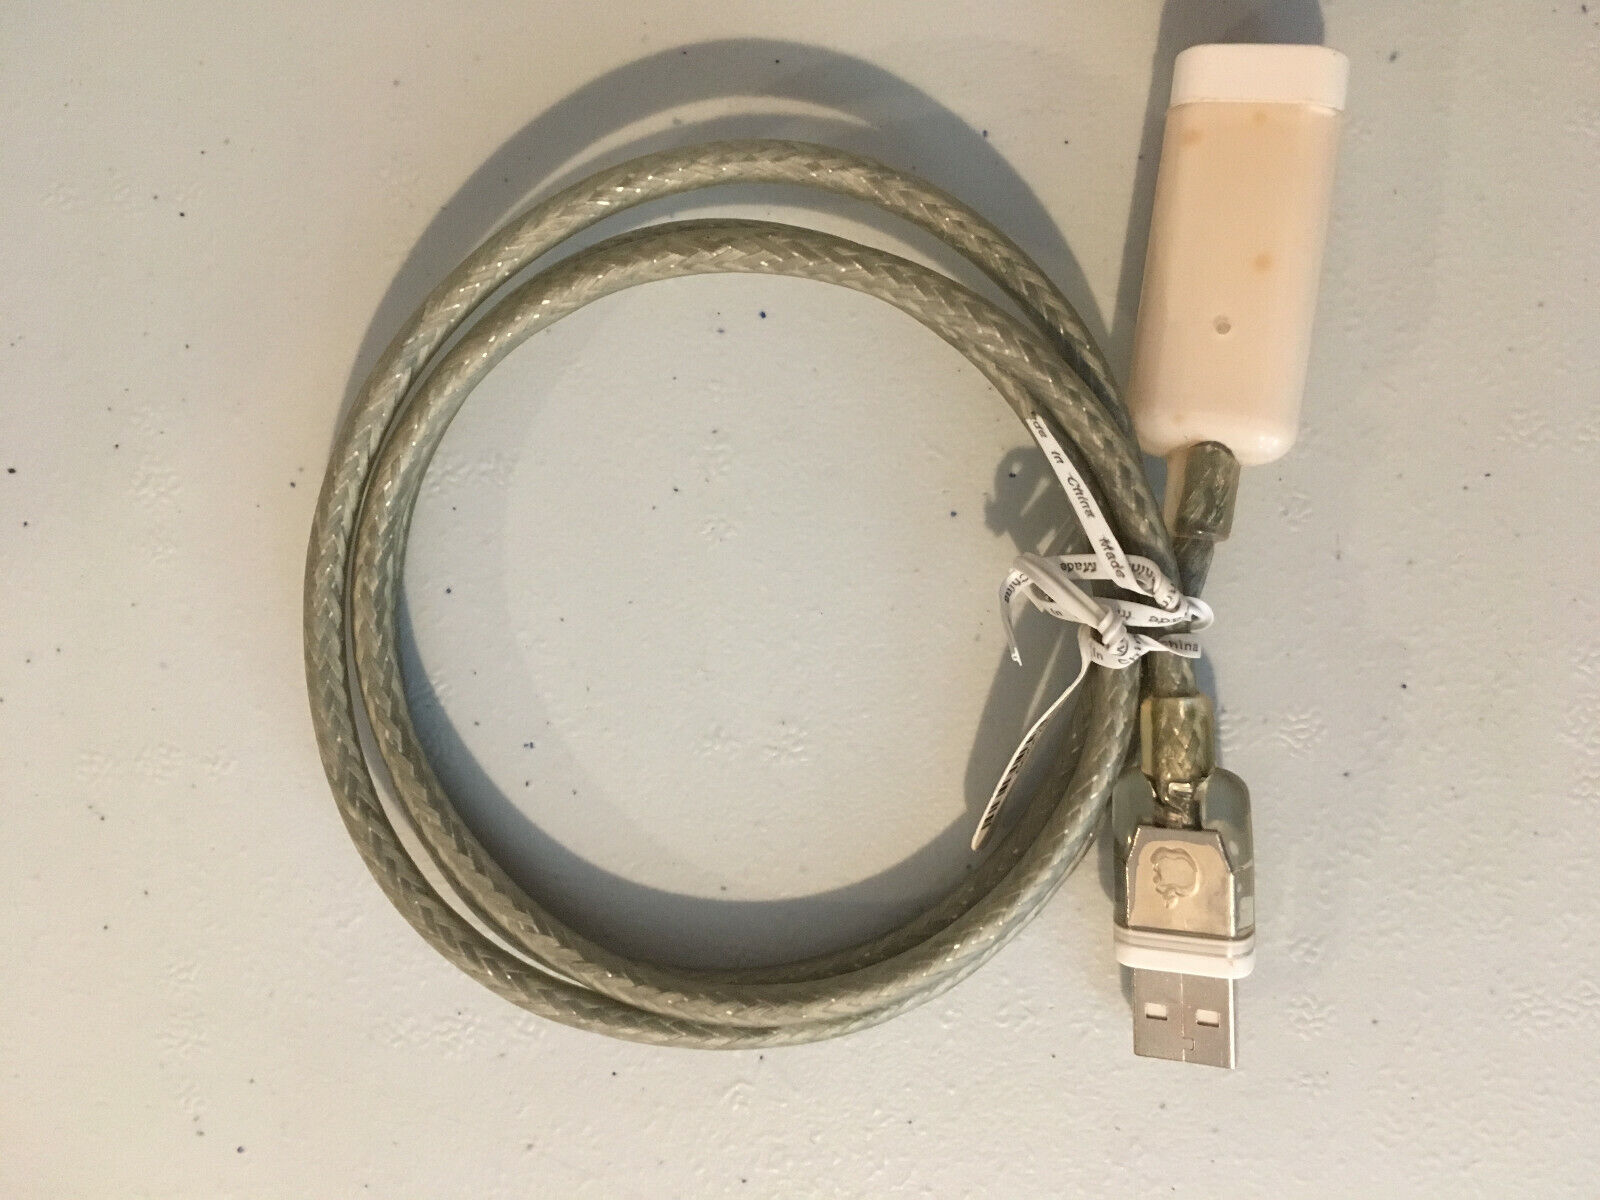 Apple USB cable 590-2299 WORKS, probably for early keyboards